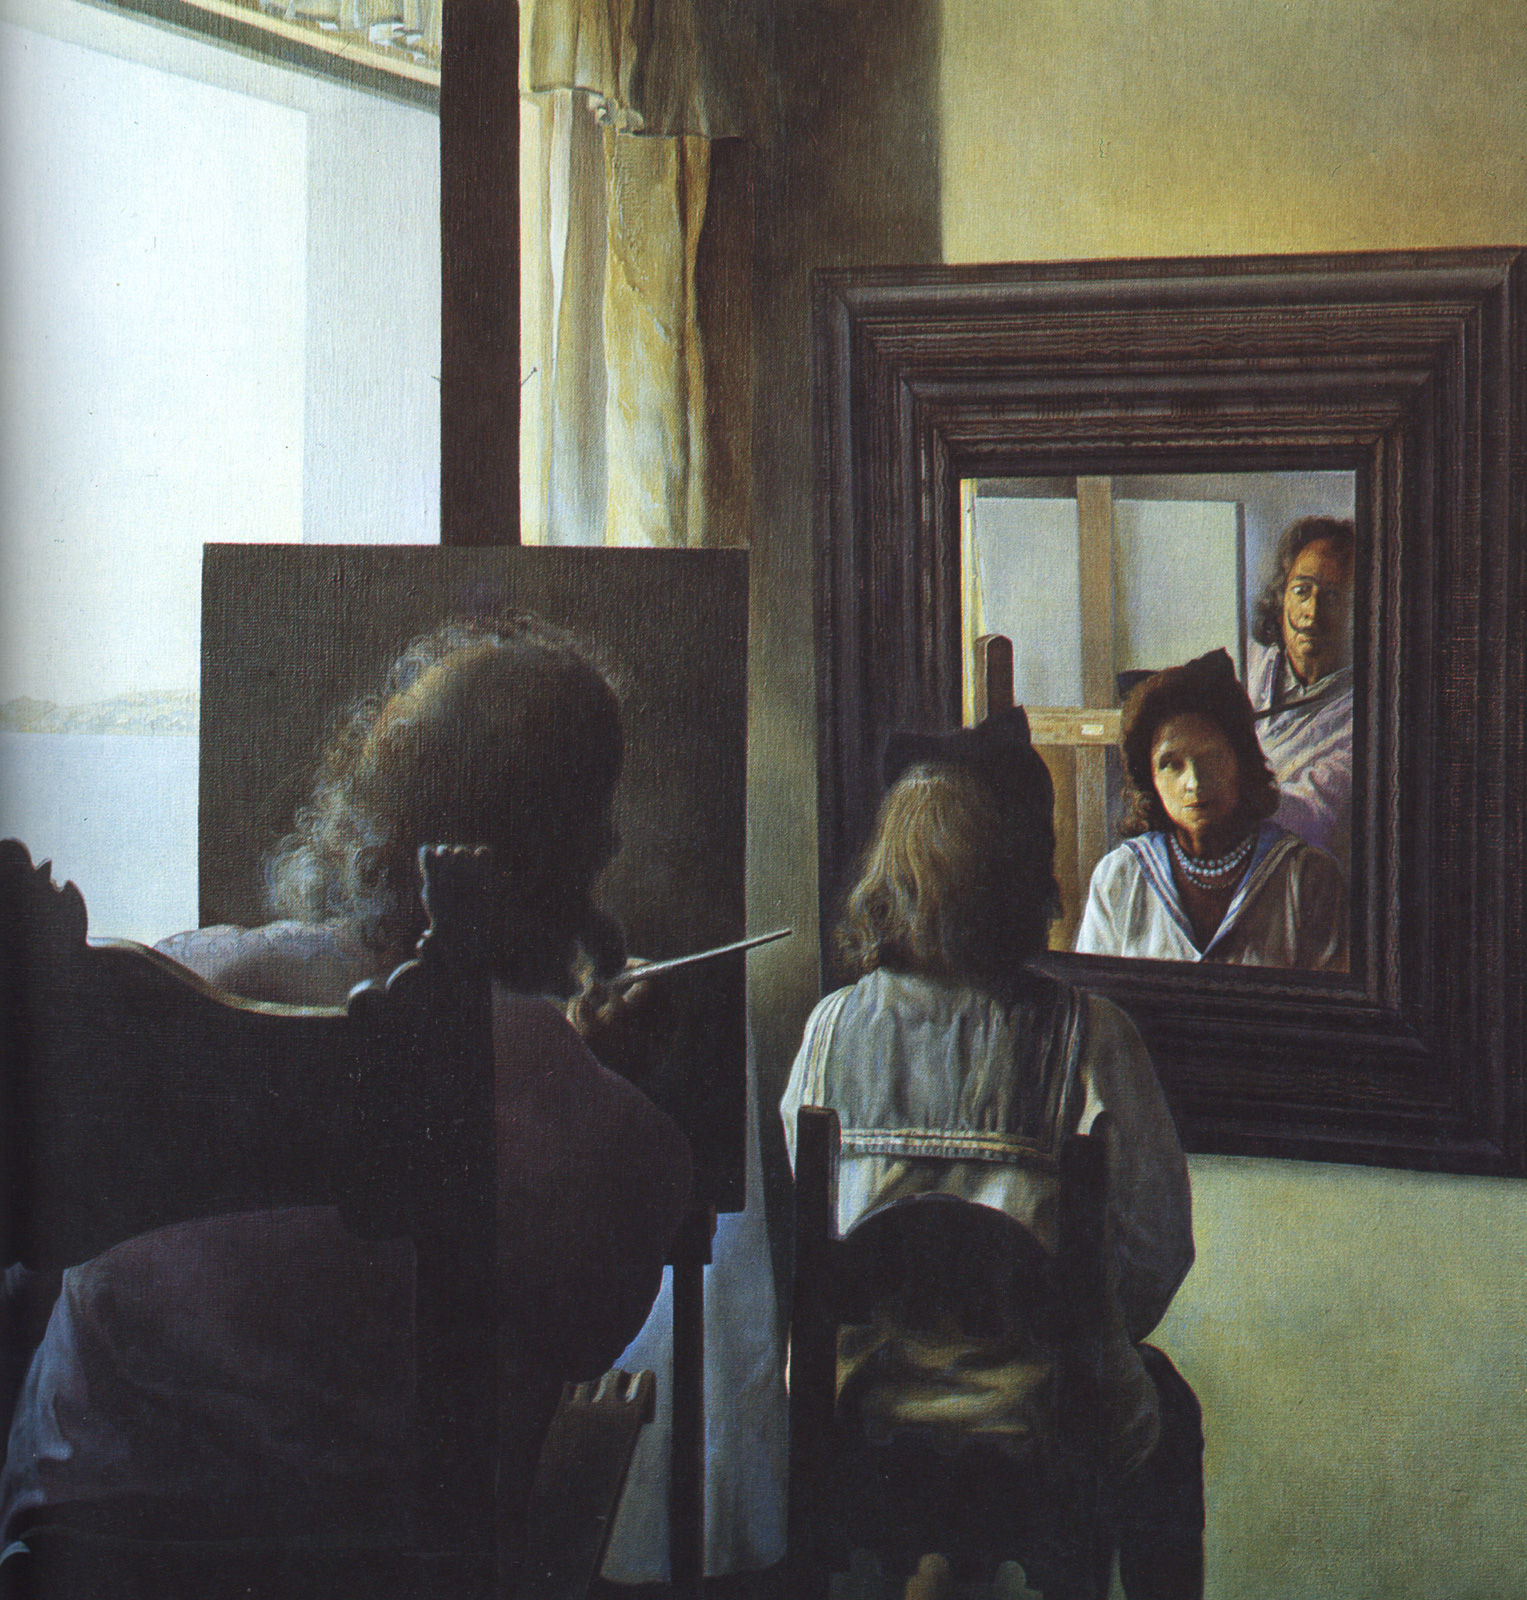 Dali from the Back Painting Gala from the Back Eternalized by Six Virtual Corneas Provisionally Reflected in Six Real Mirrors (1973).